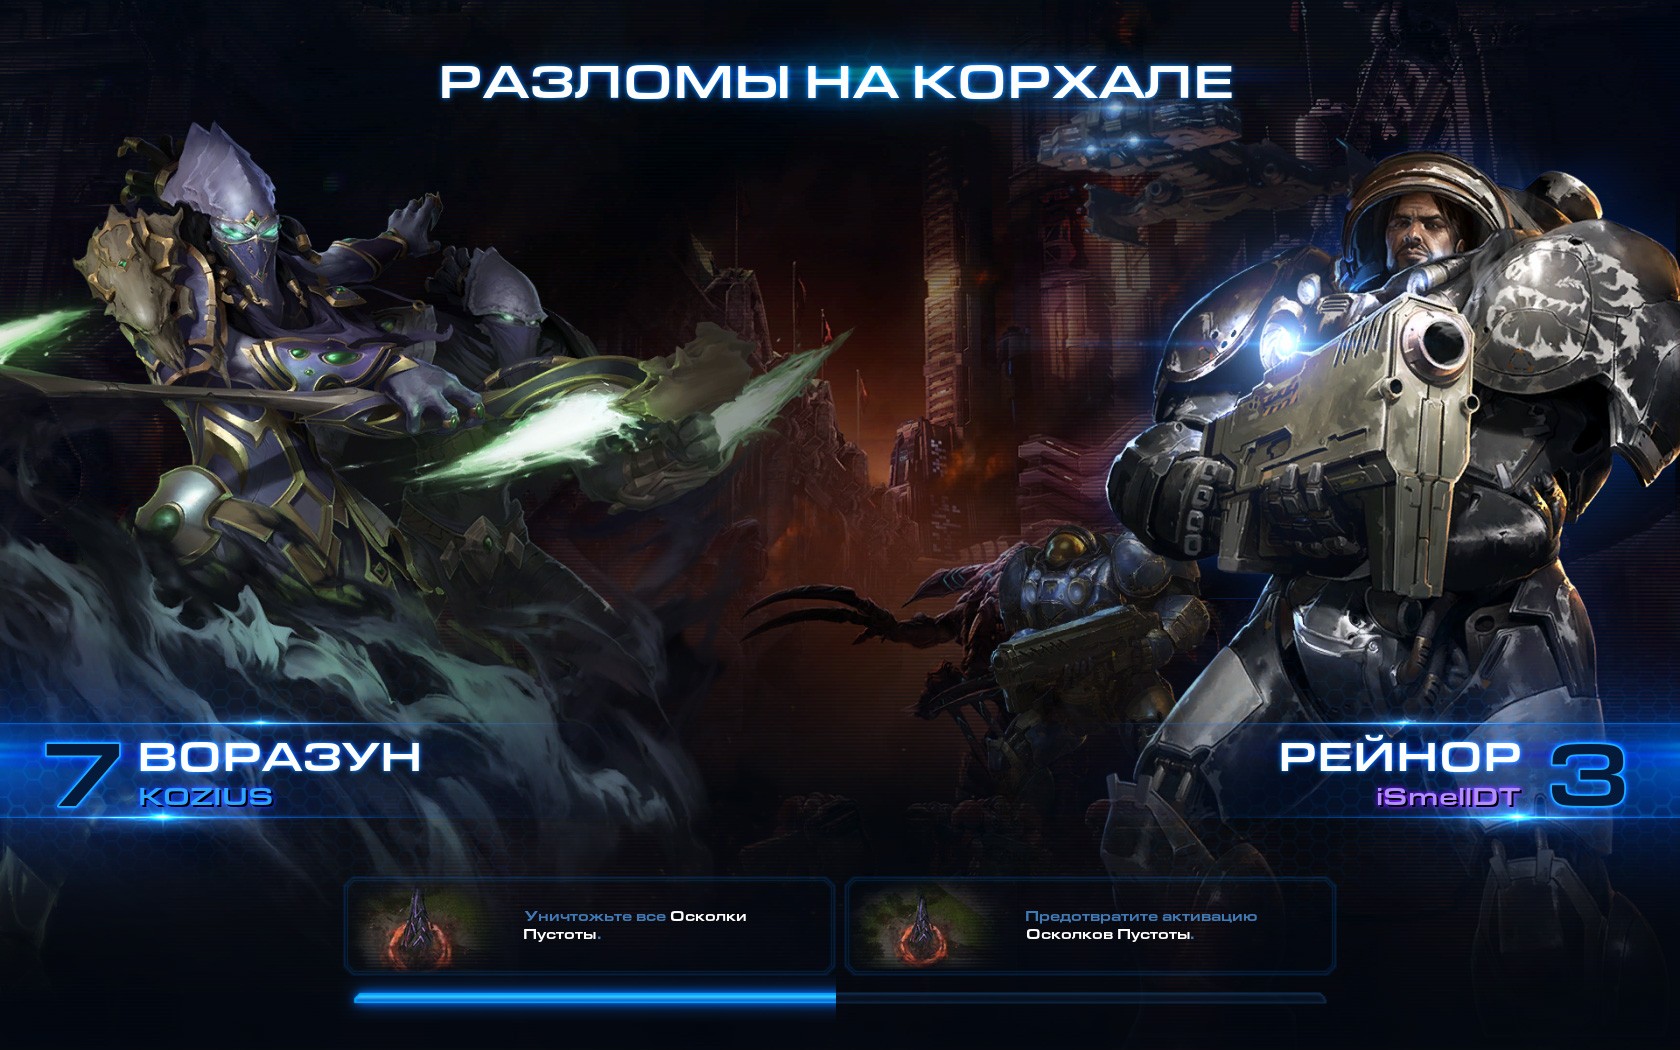 StarCraft II: Legacy of The Void